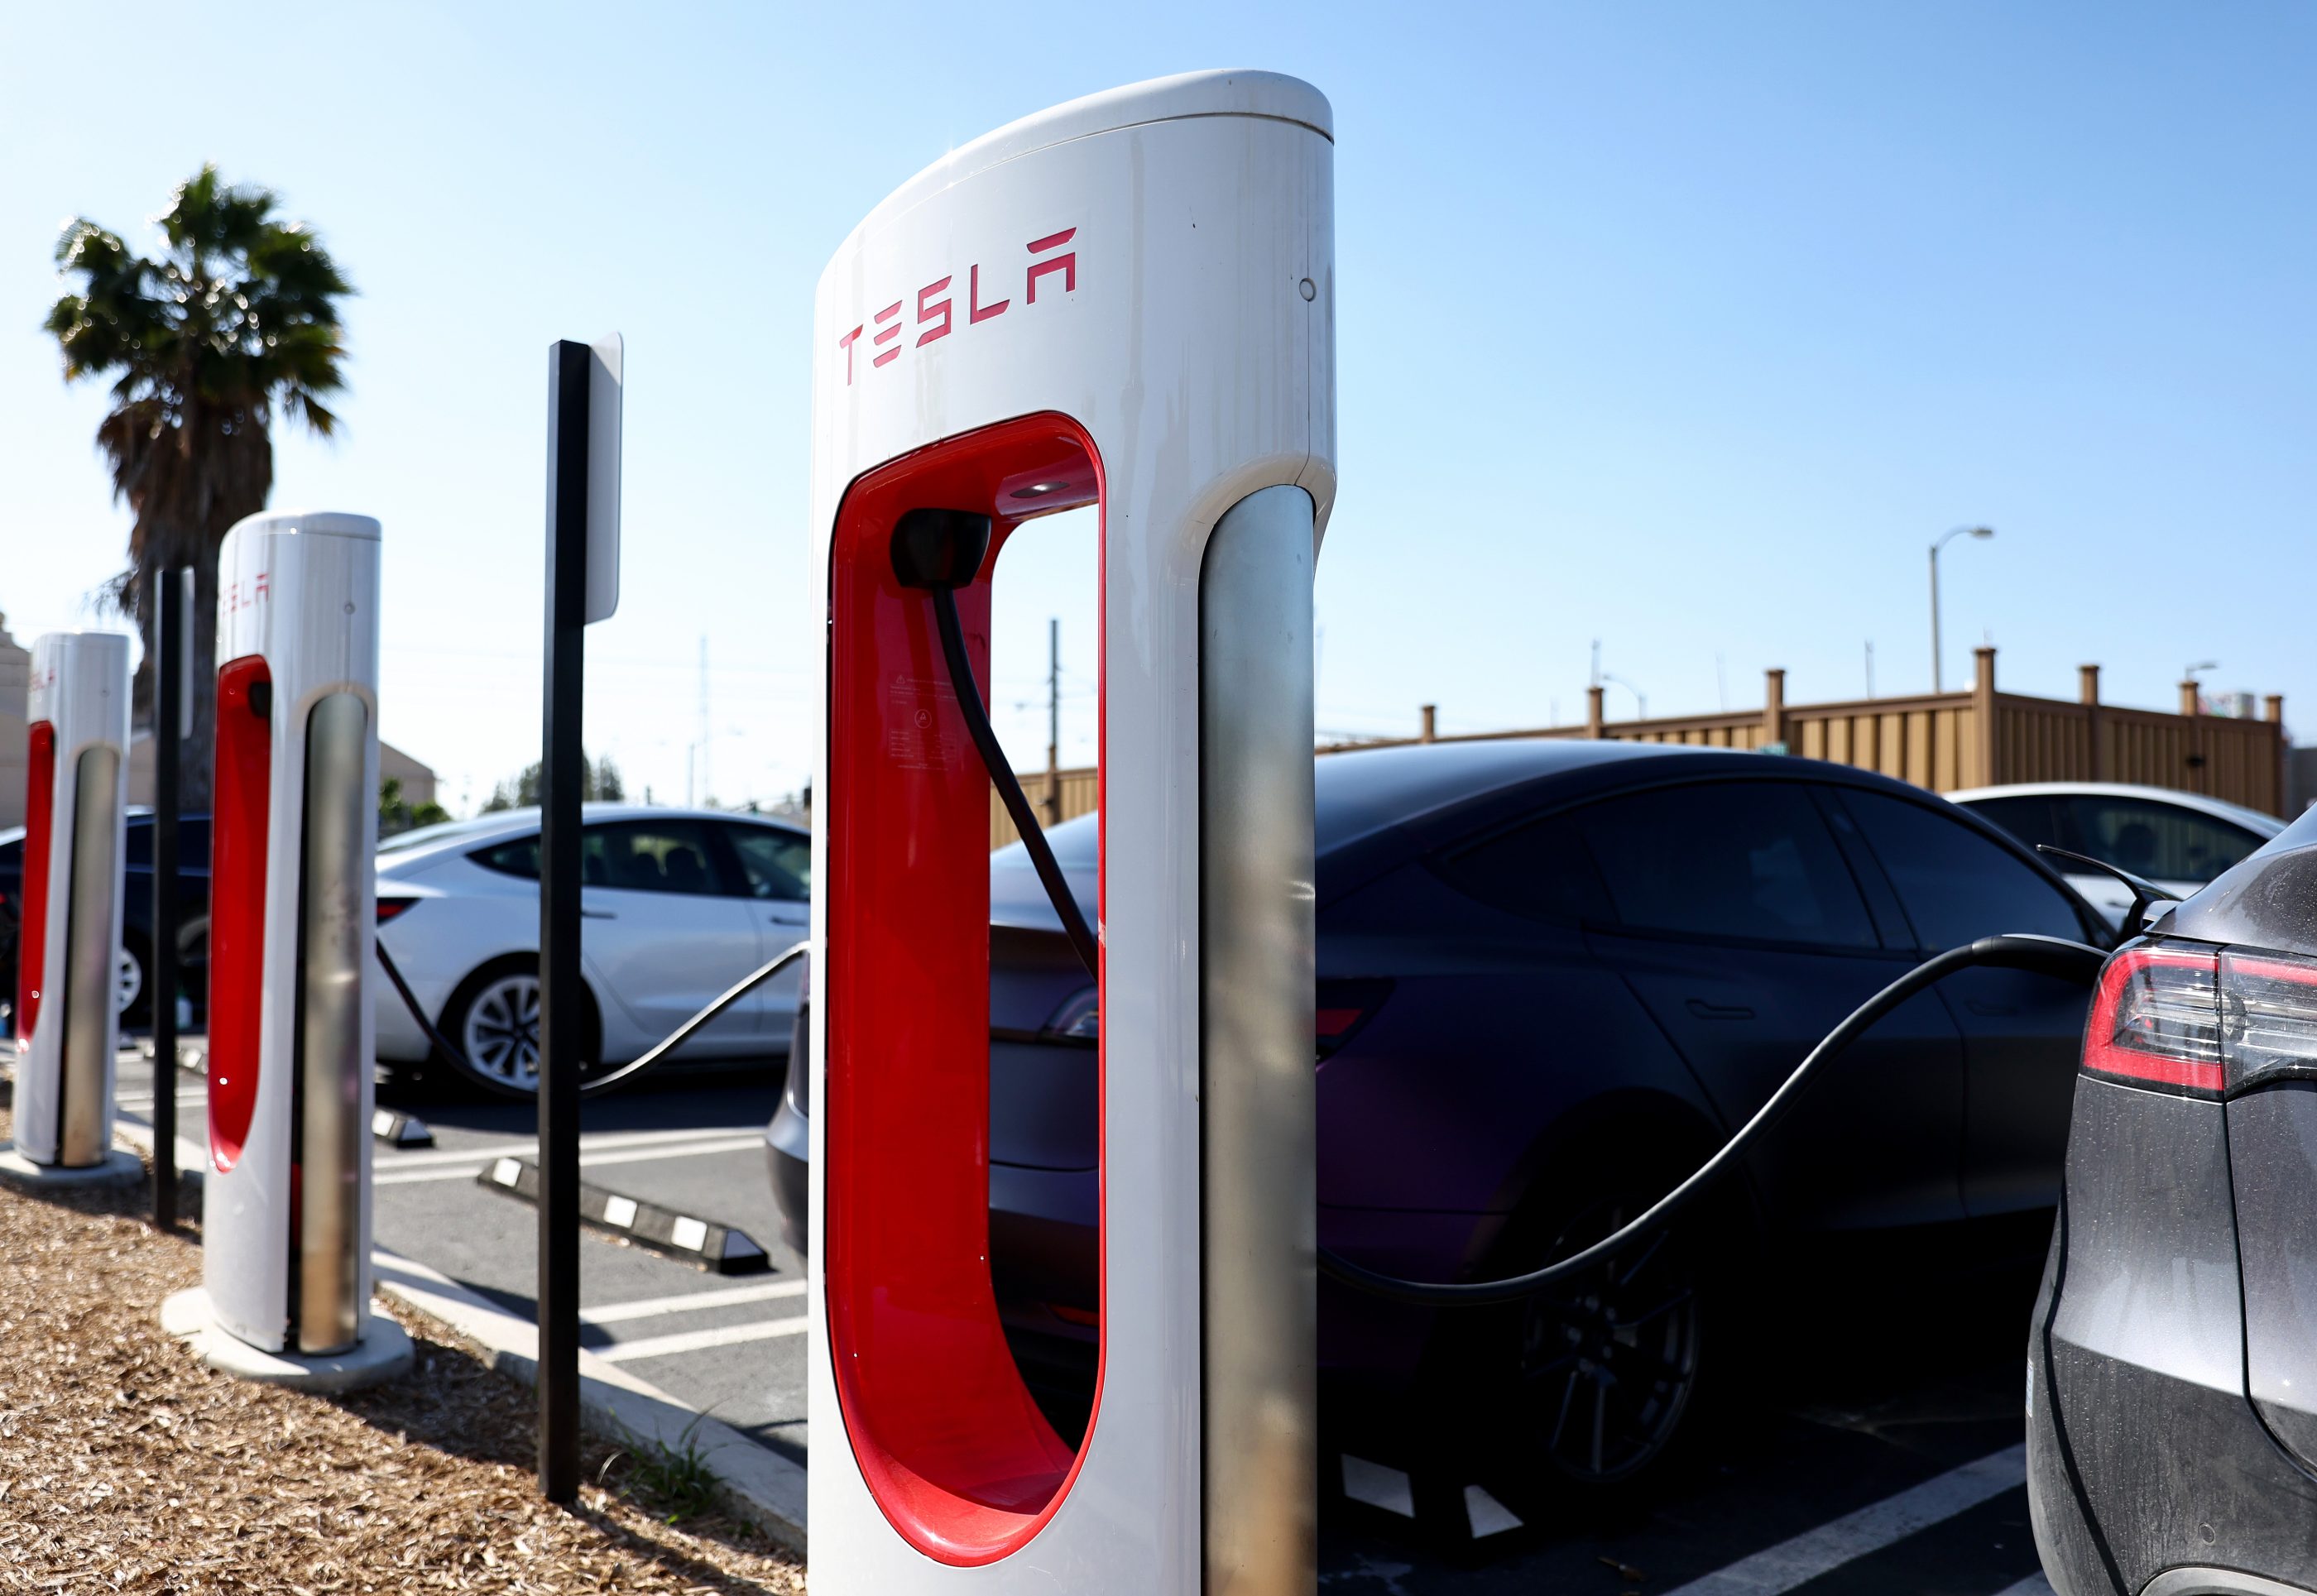 Tesla's EV chargers add to company's electric vehicle market dominance